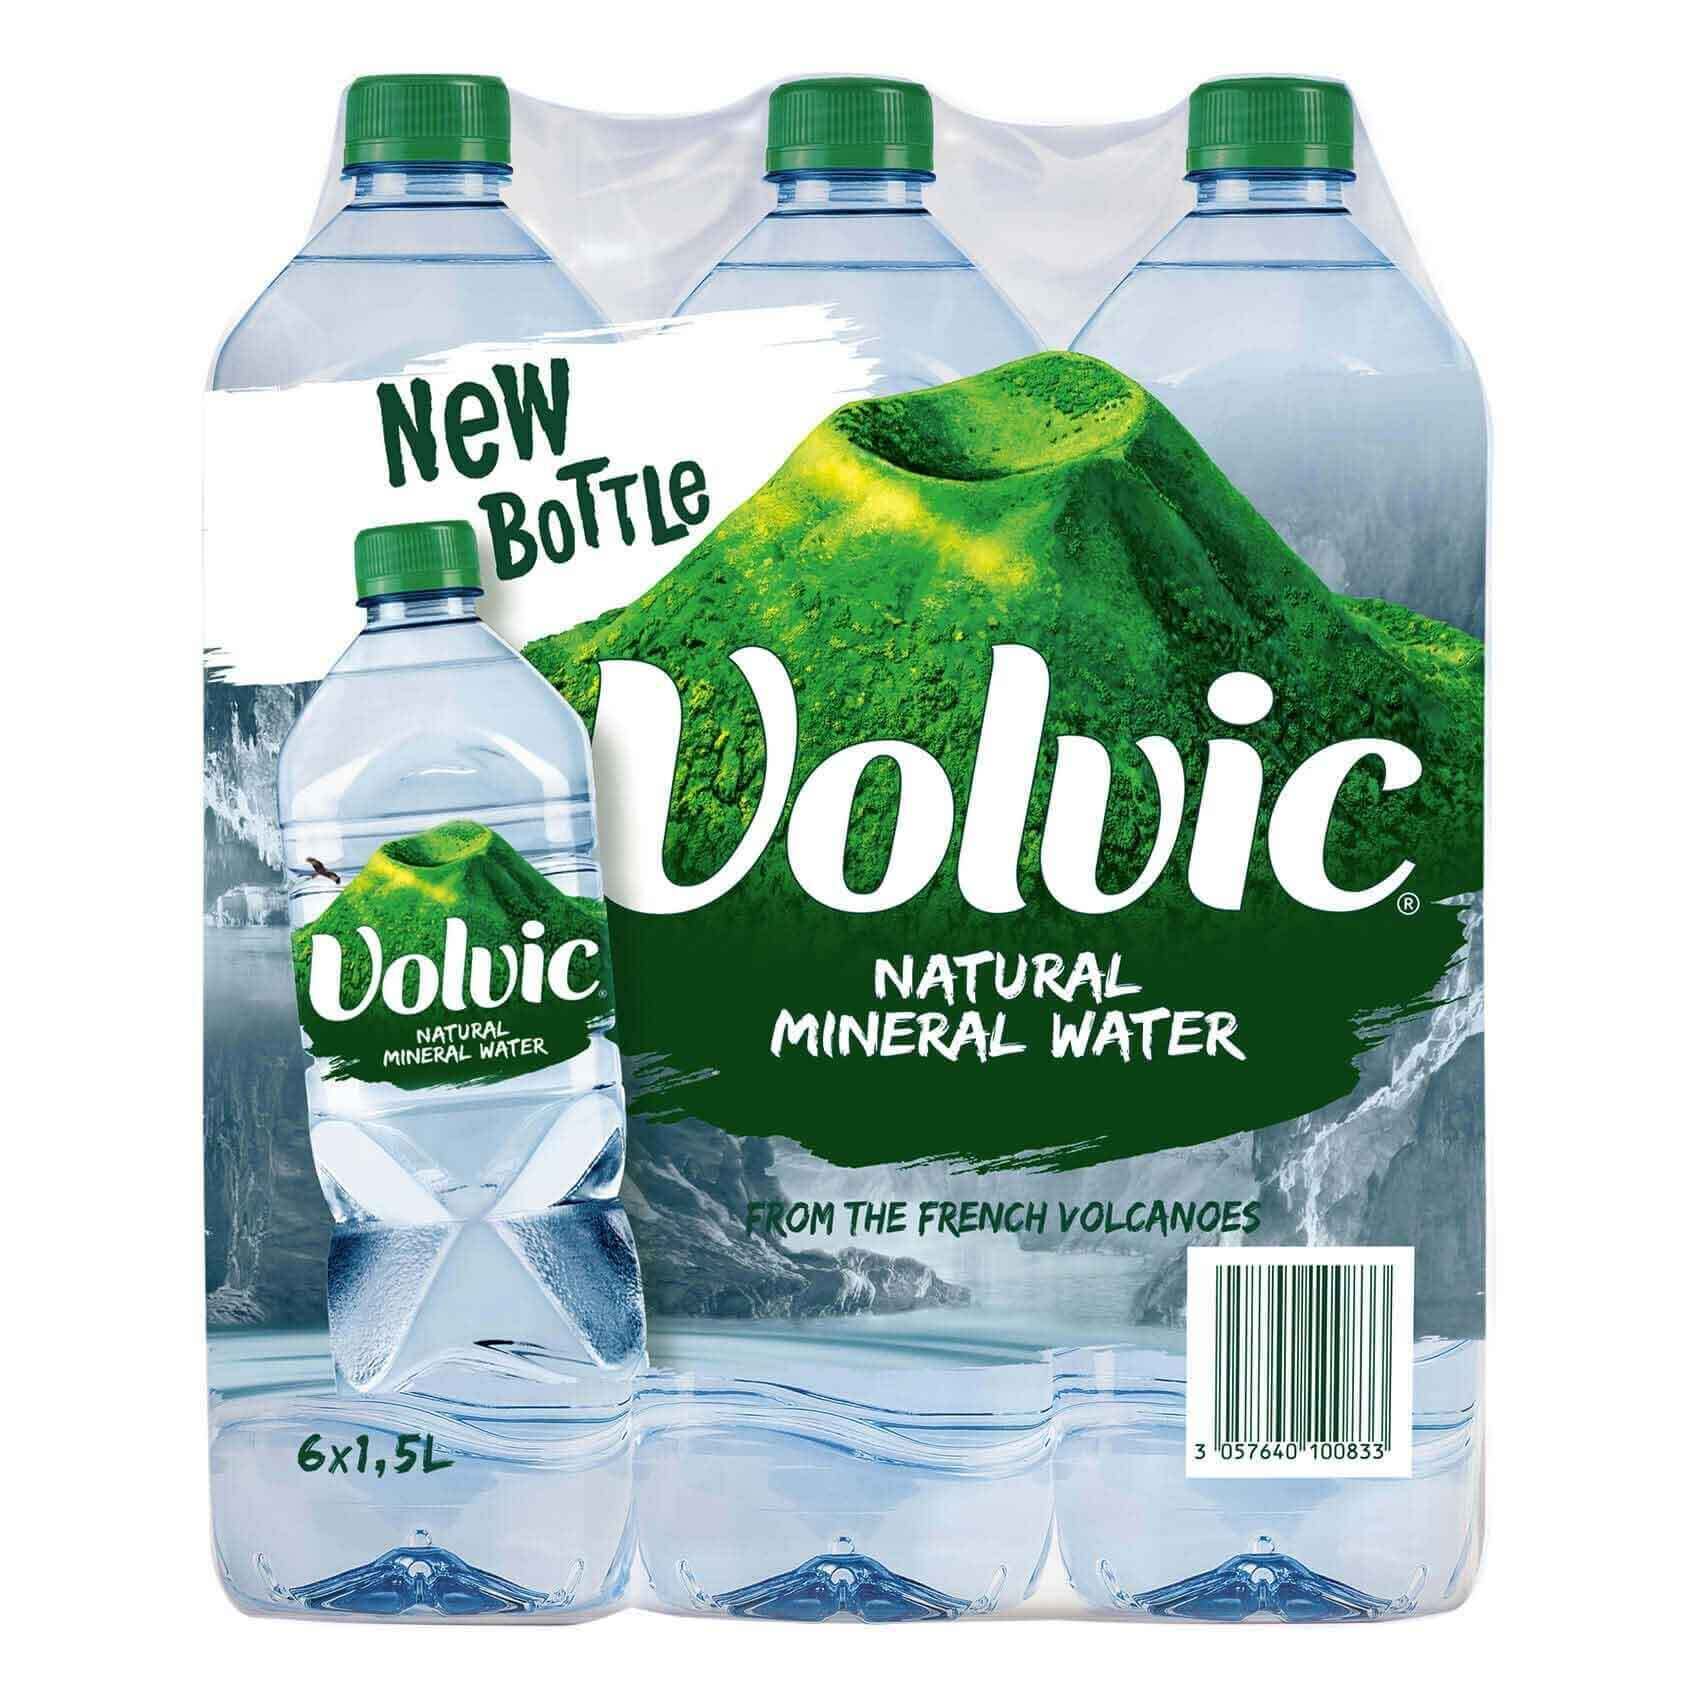 VOLVIC NATURAL SPRING WATER FROM FRANCE